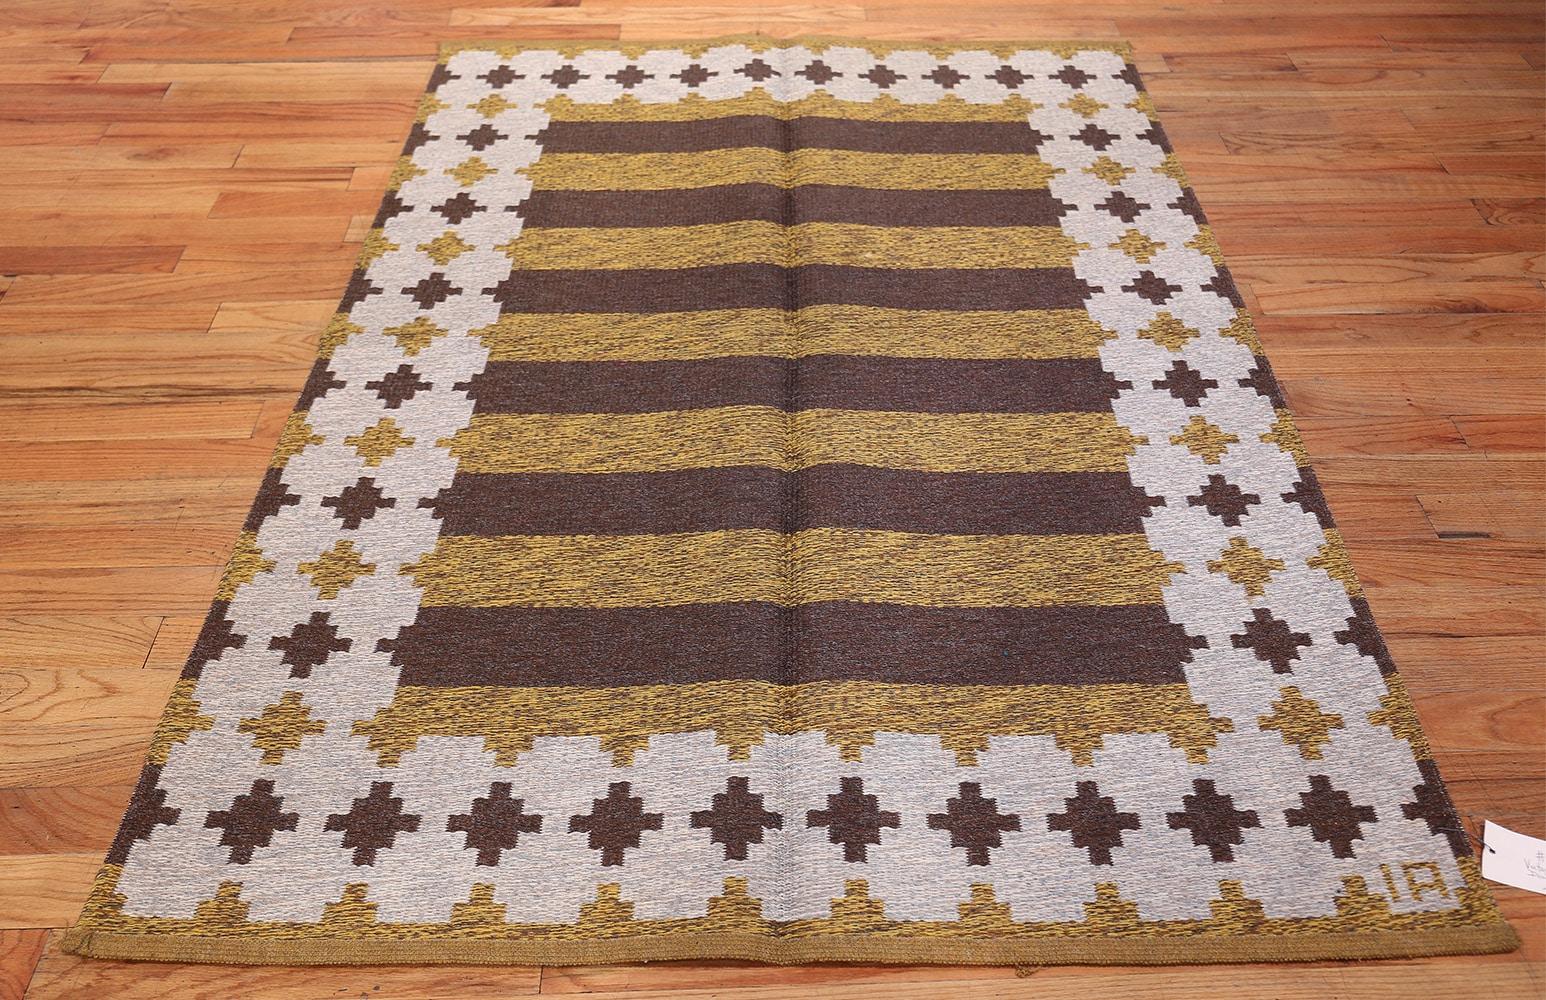 Wool Vintage Double Sided Swedish Kilim Rug. Size: 4 ft 6 in x 6 ft 8 in 